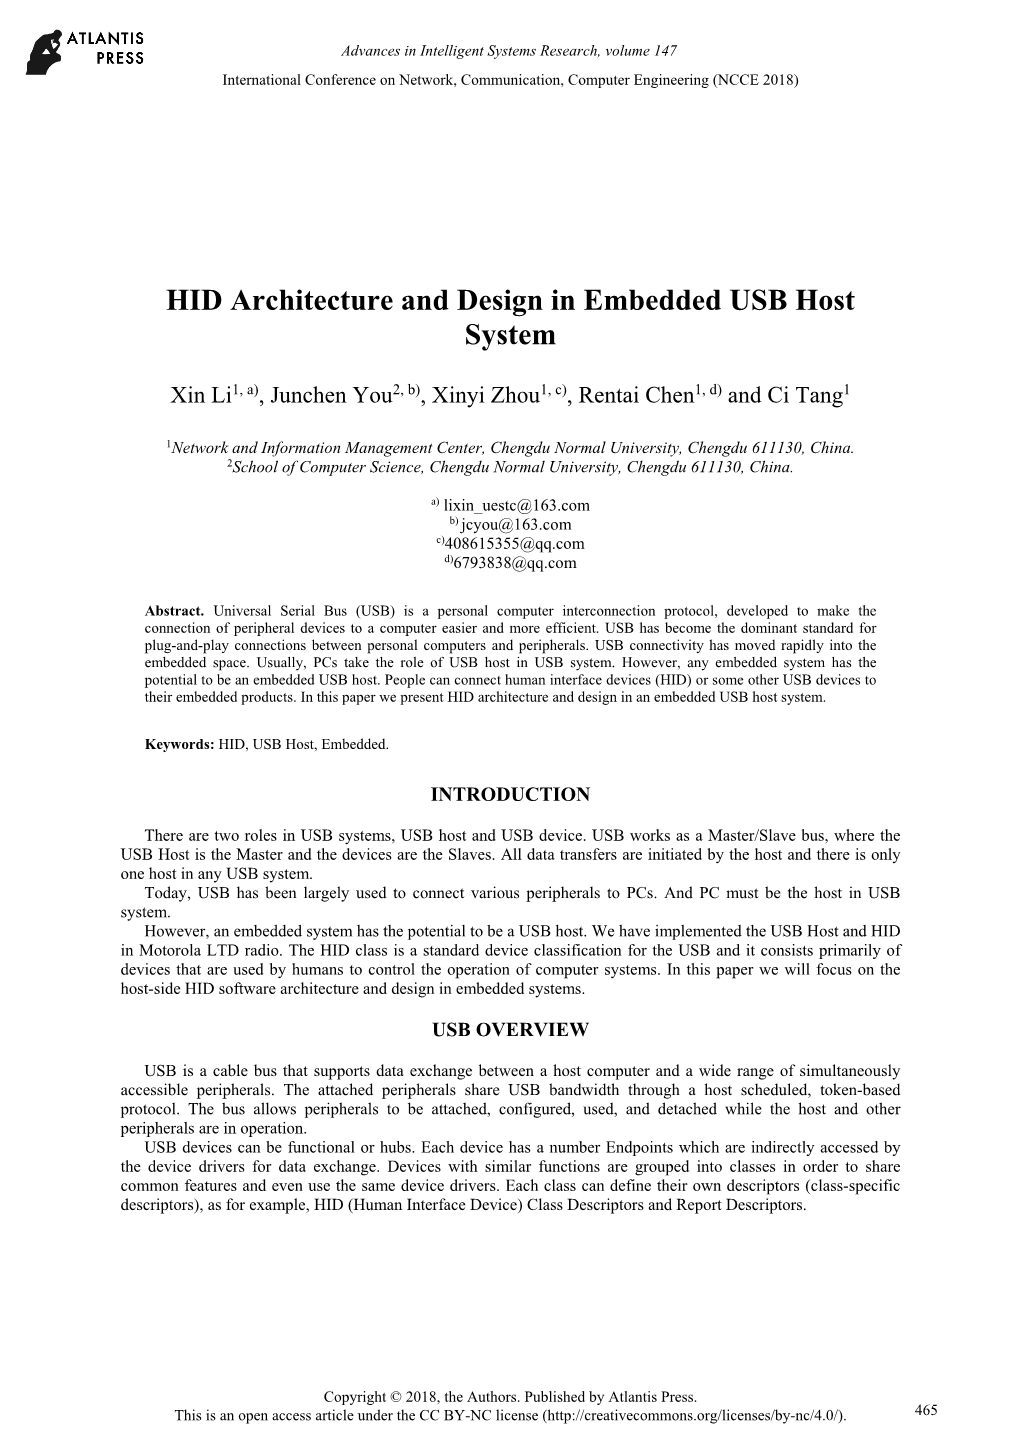 HID Architecture and Design in Embedded USB Host System